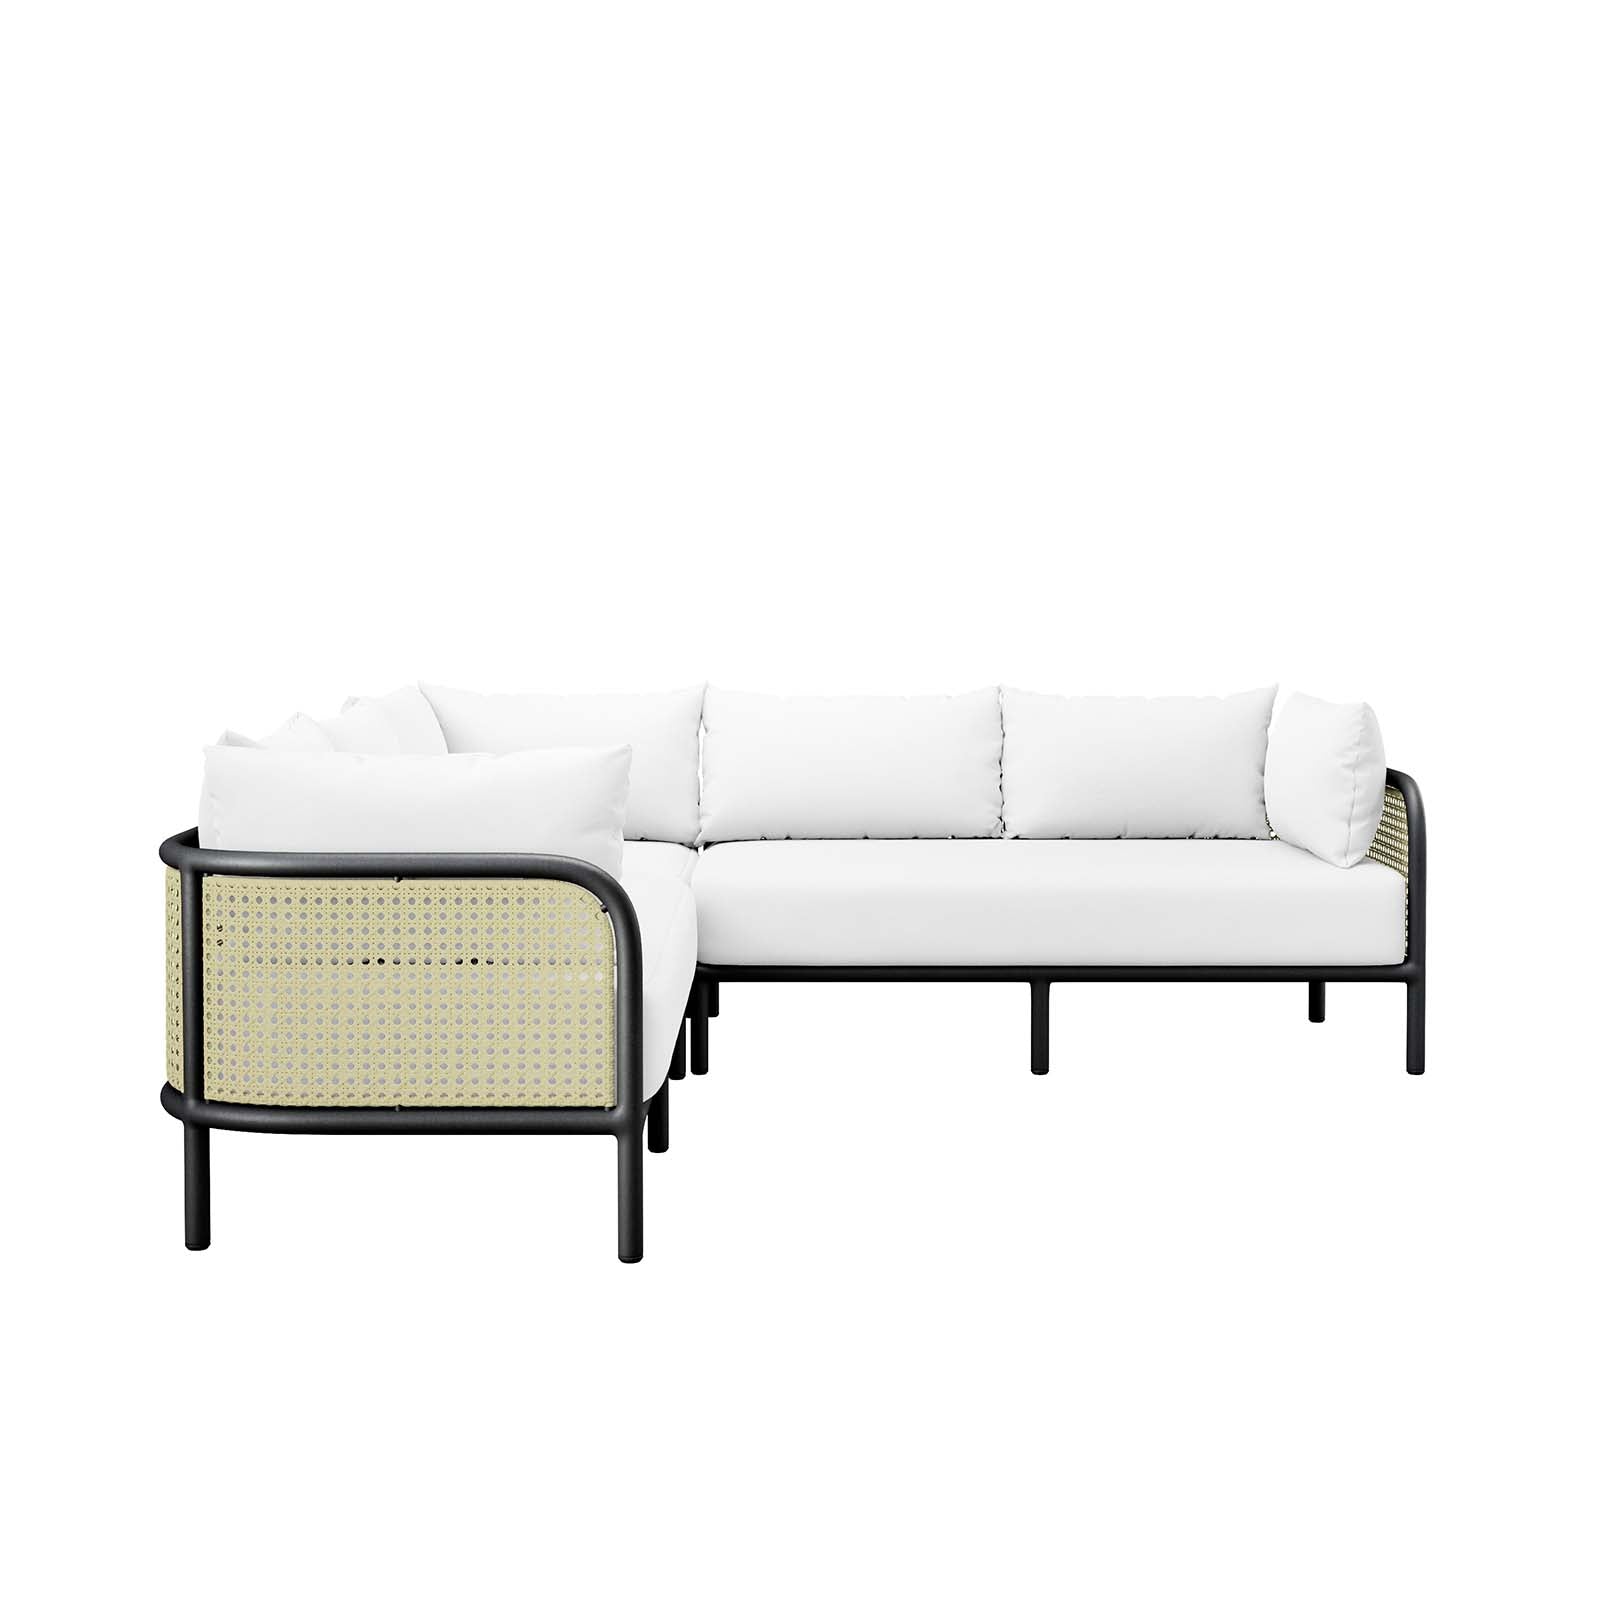 Modway Outdoor Sofas - Hanalei Outdoor Patio 3-Piece Sectional Ivory White